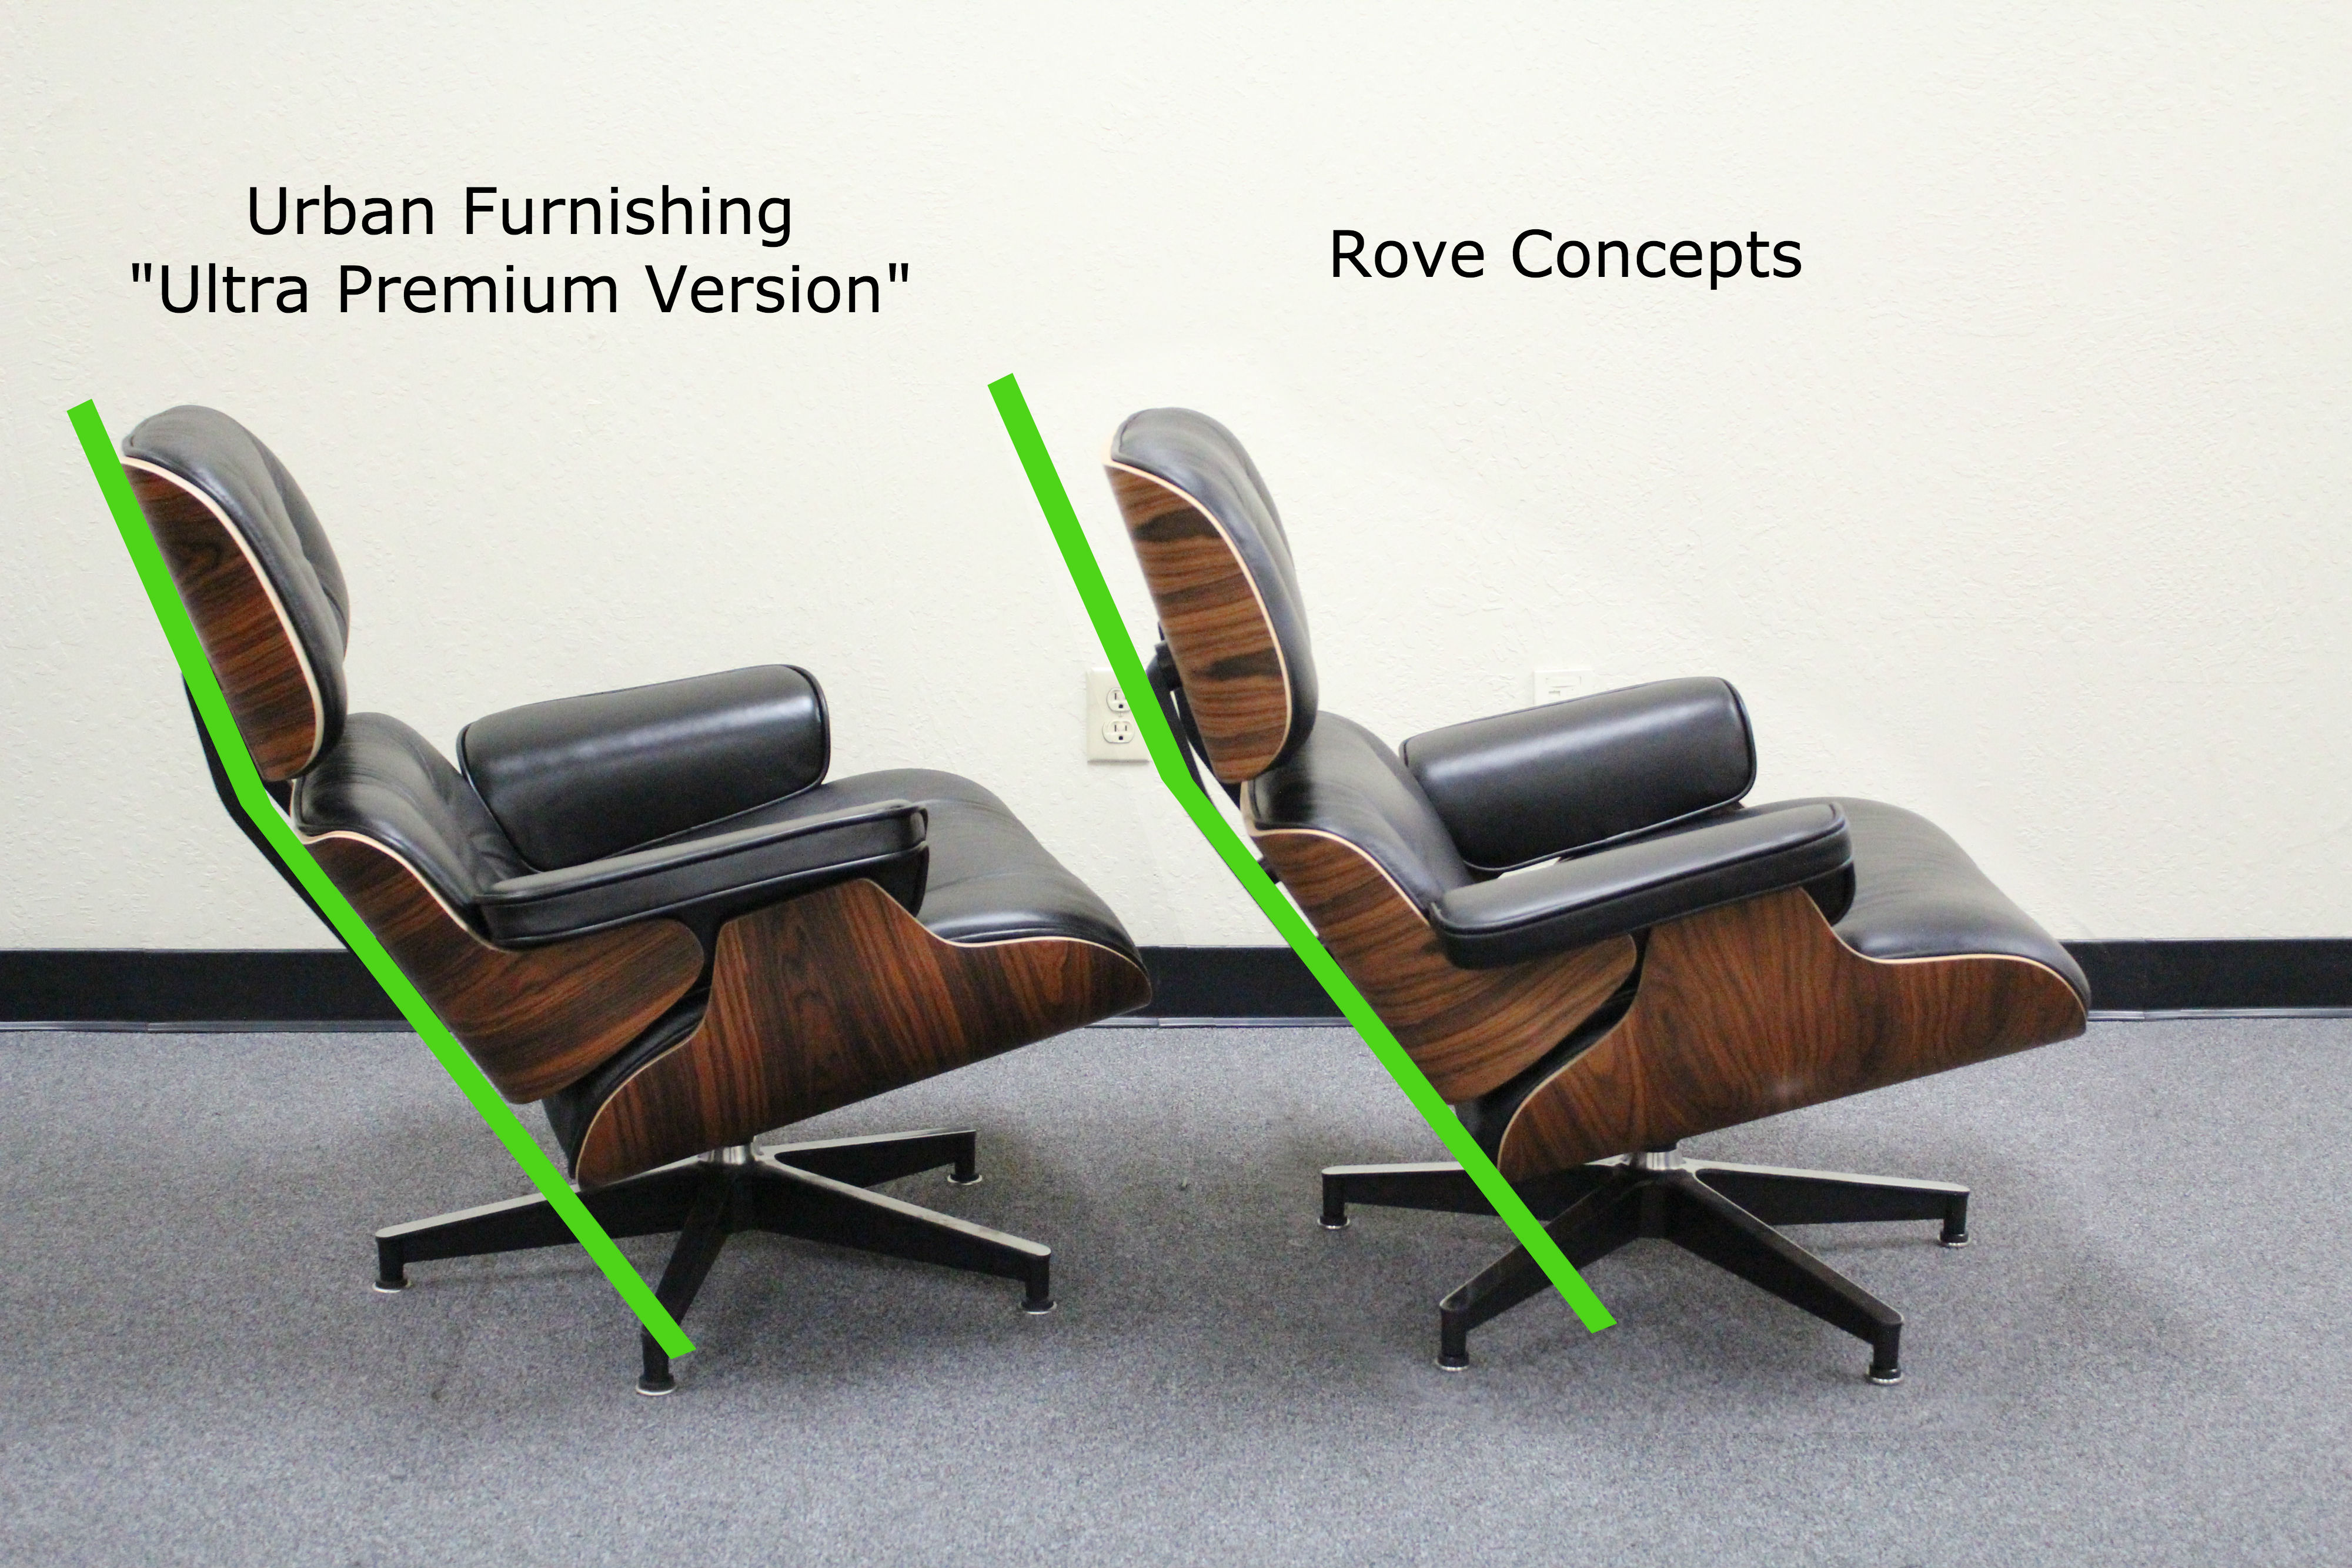 Eames Lounge Chair copies... worth it? | Page 59 | Styleforum